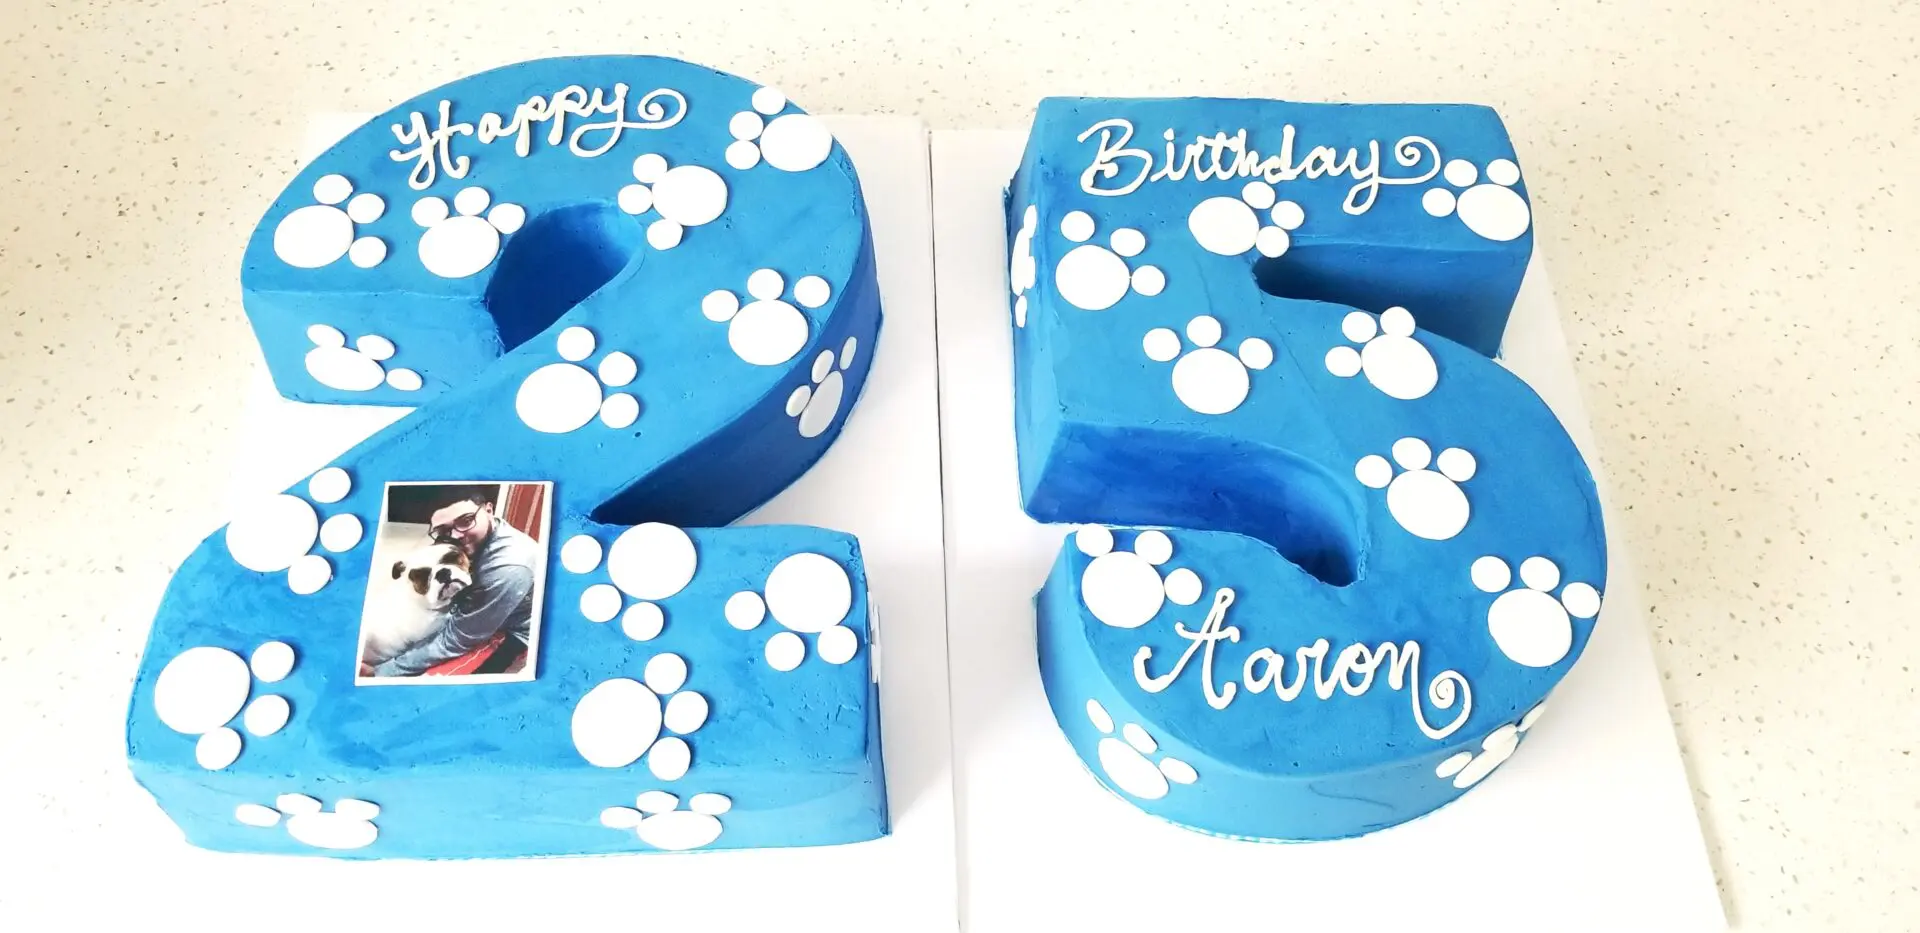 25th Aaron 3D decorated Cakes